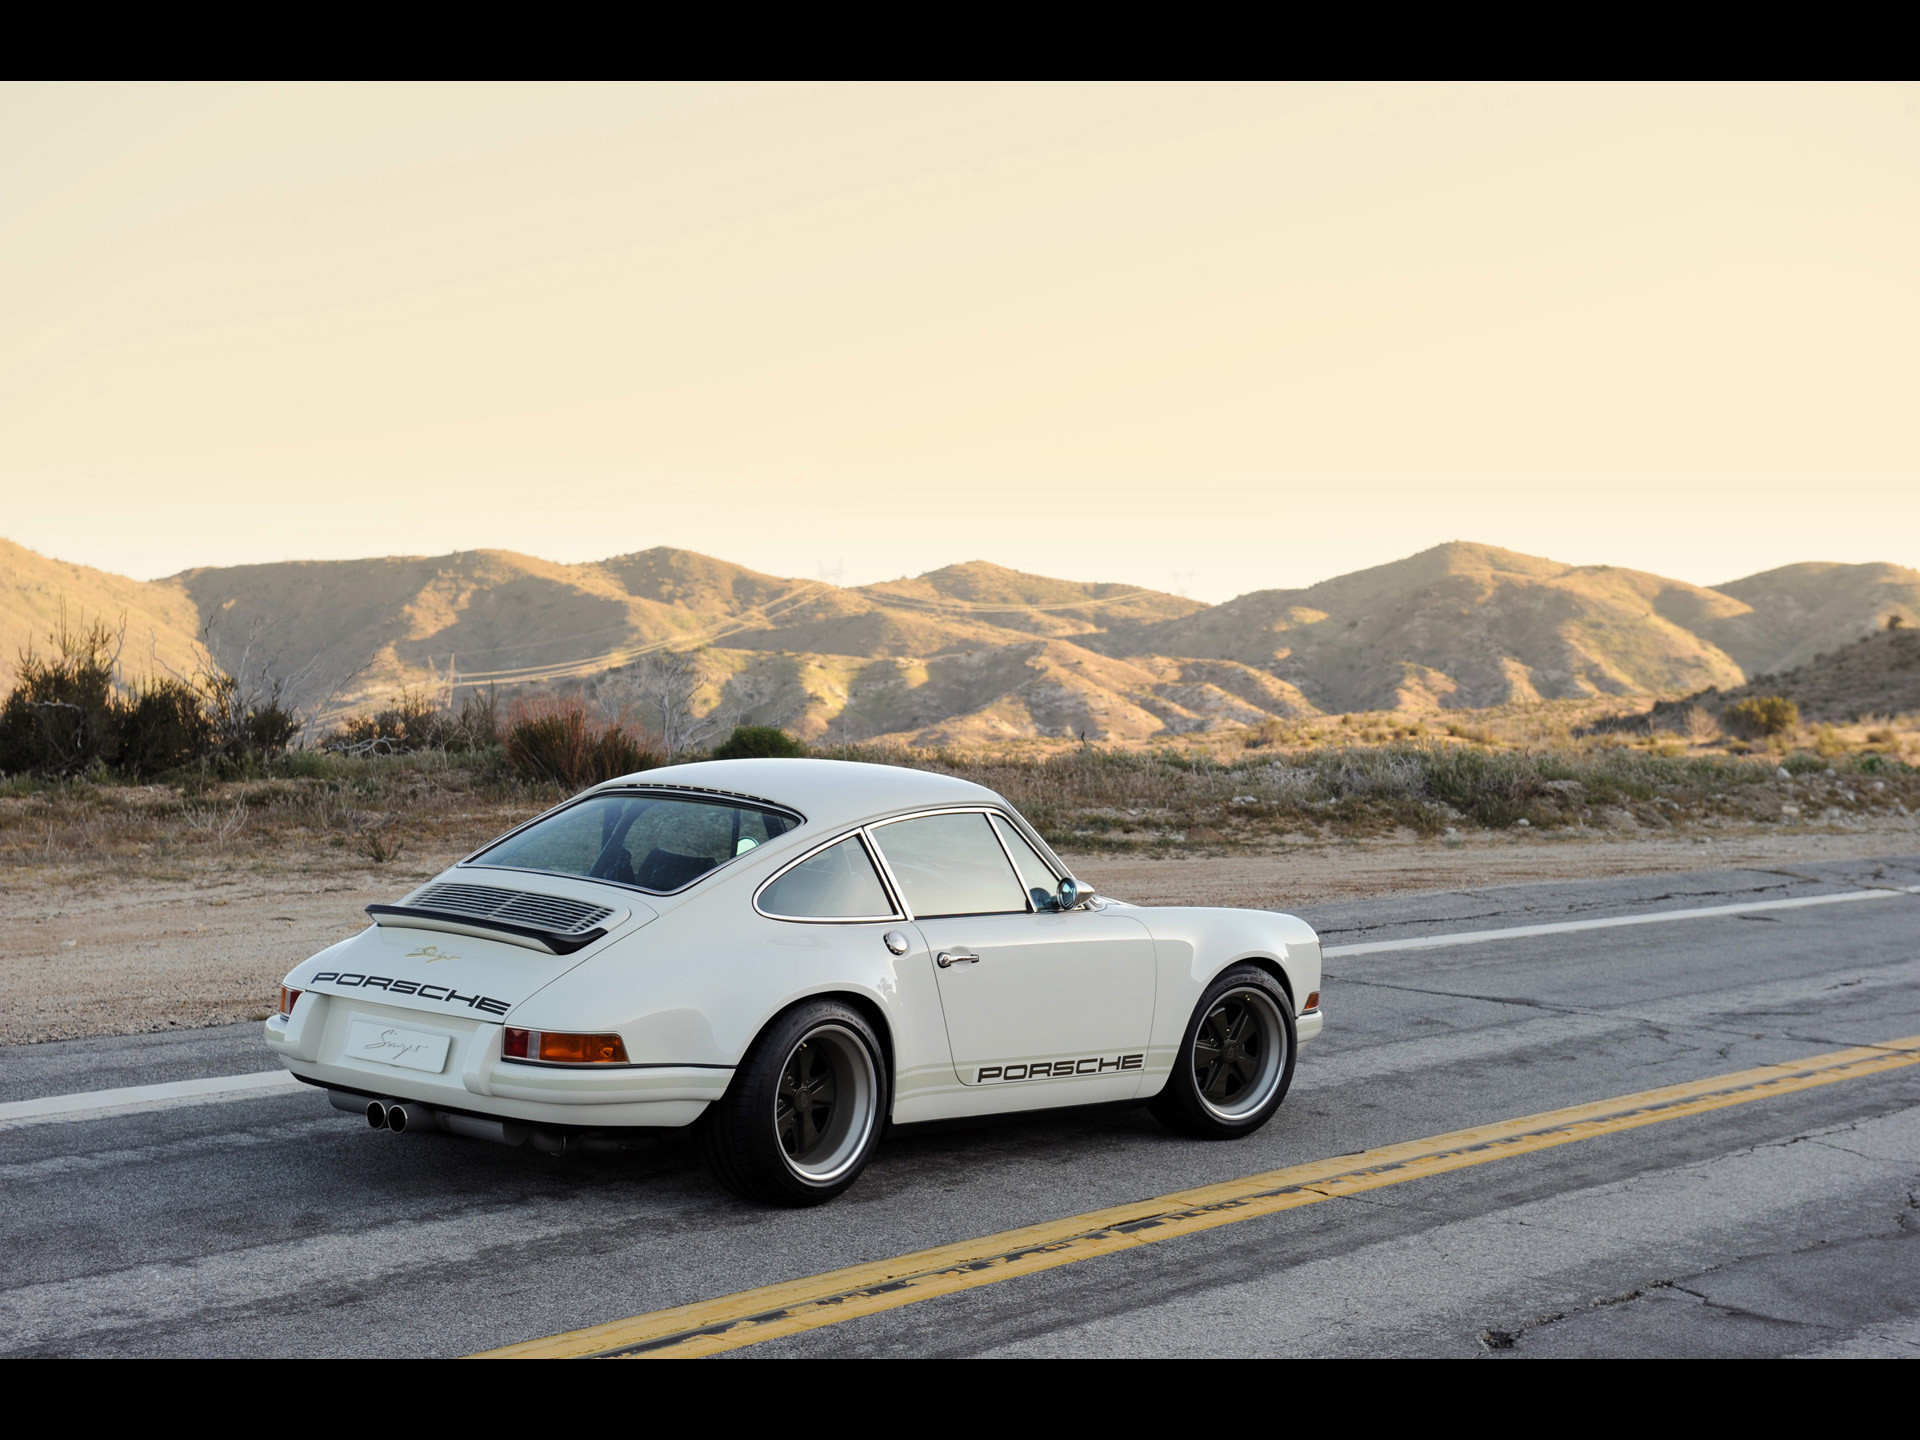 1920x1440 Image: White Singer Porsche 911 Side wallpapers and stock photos. Â«